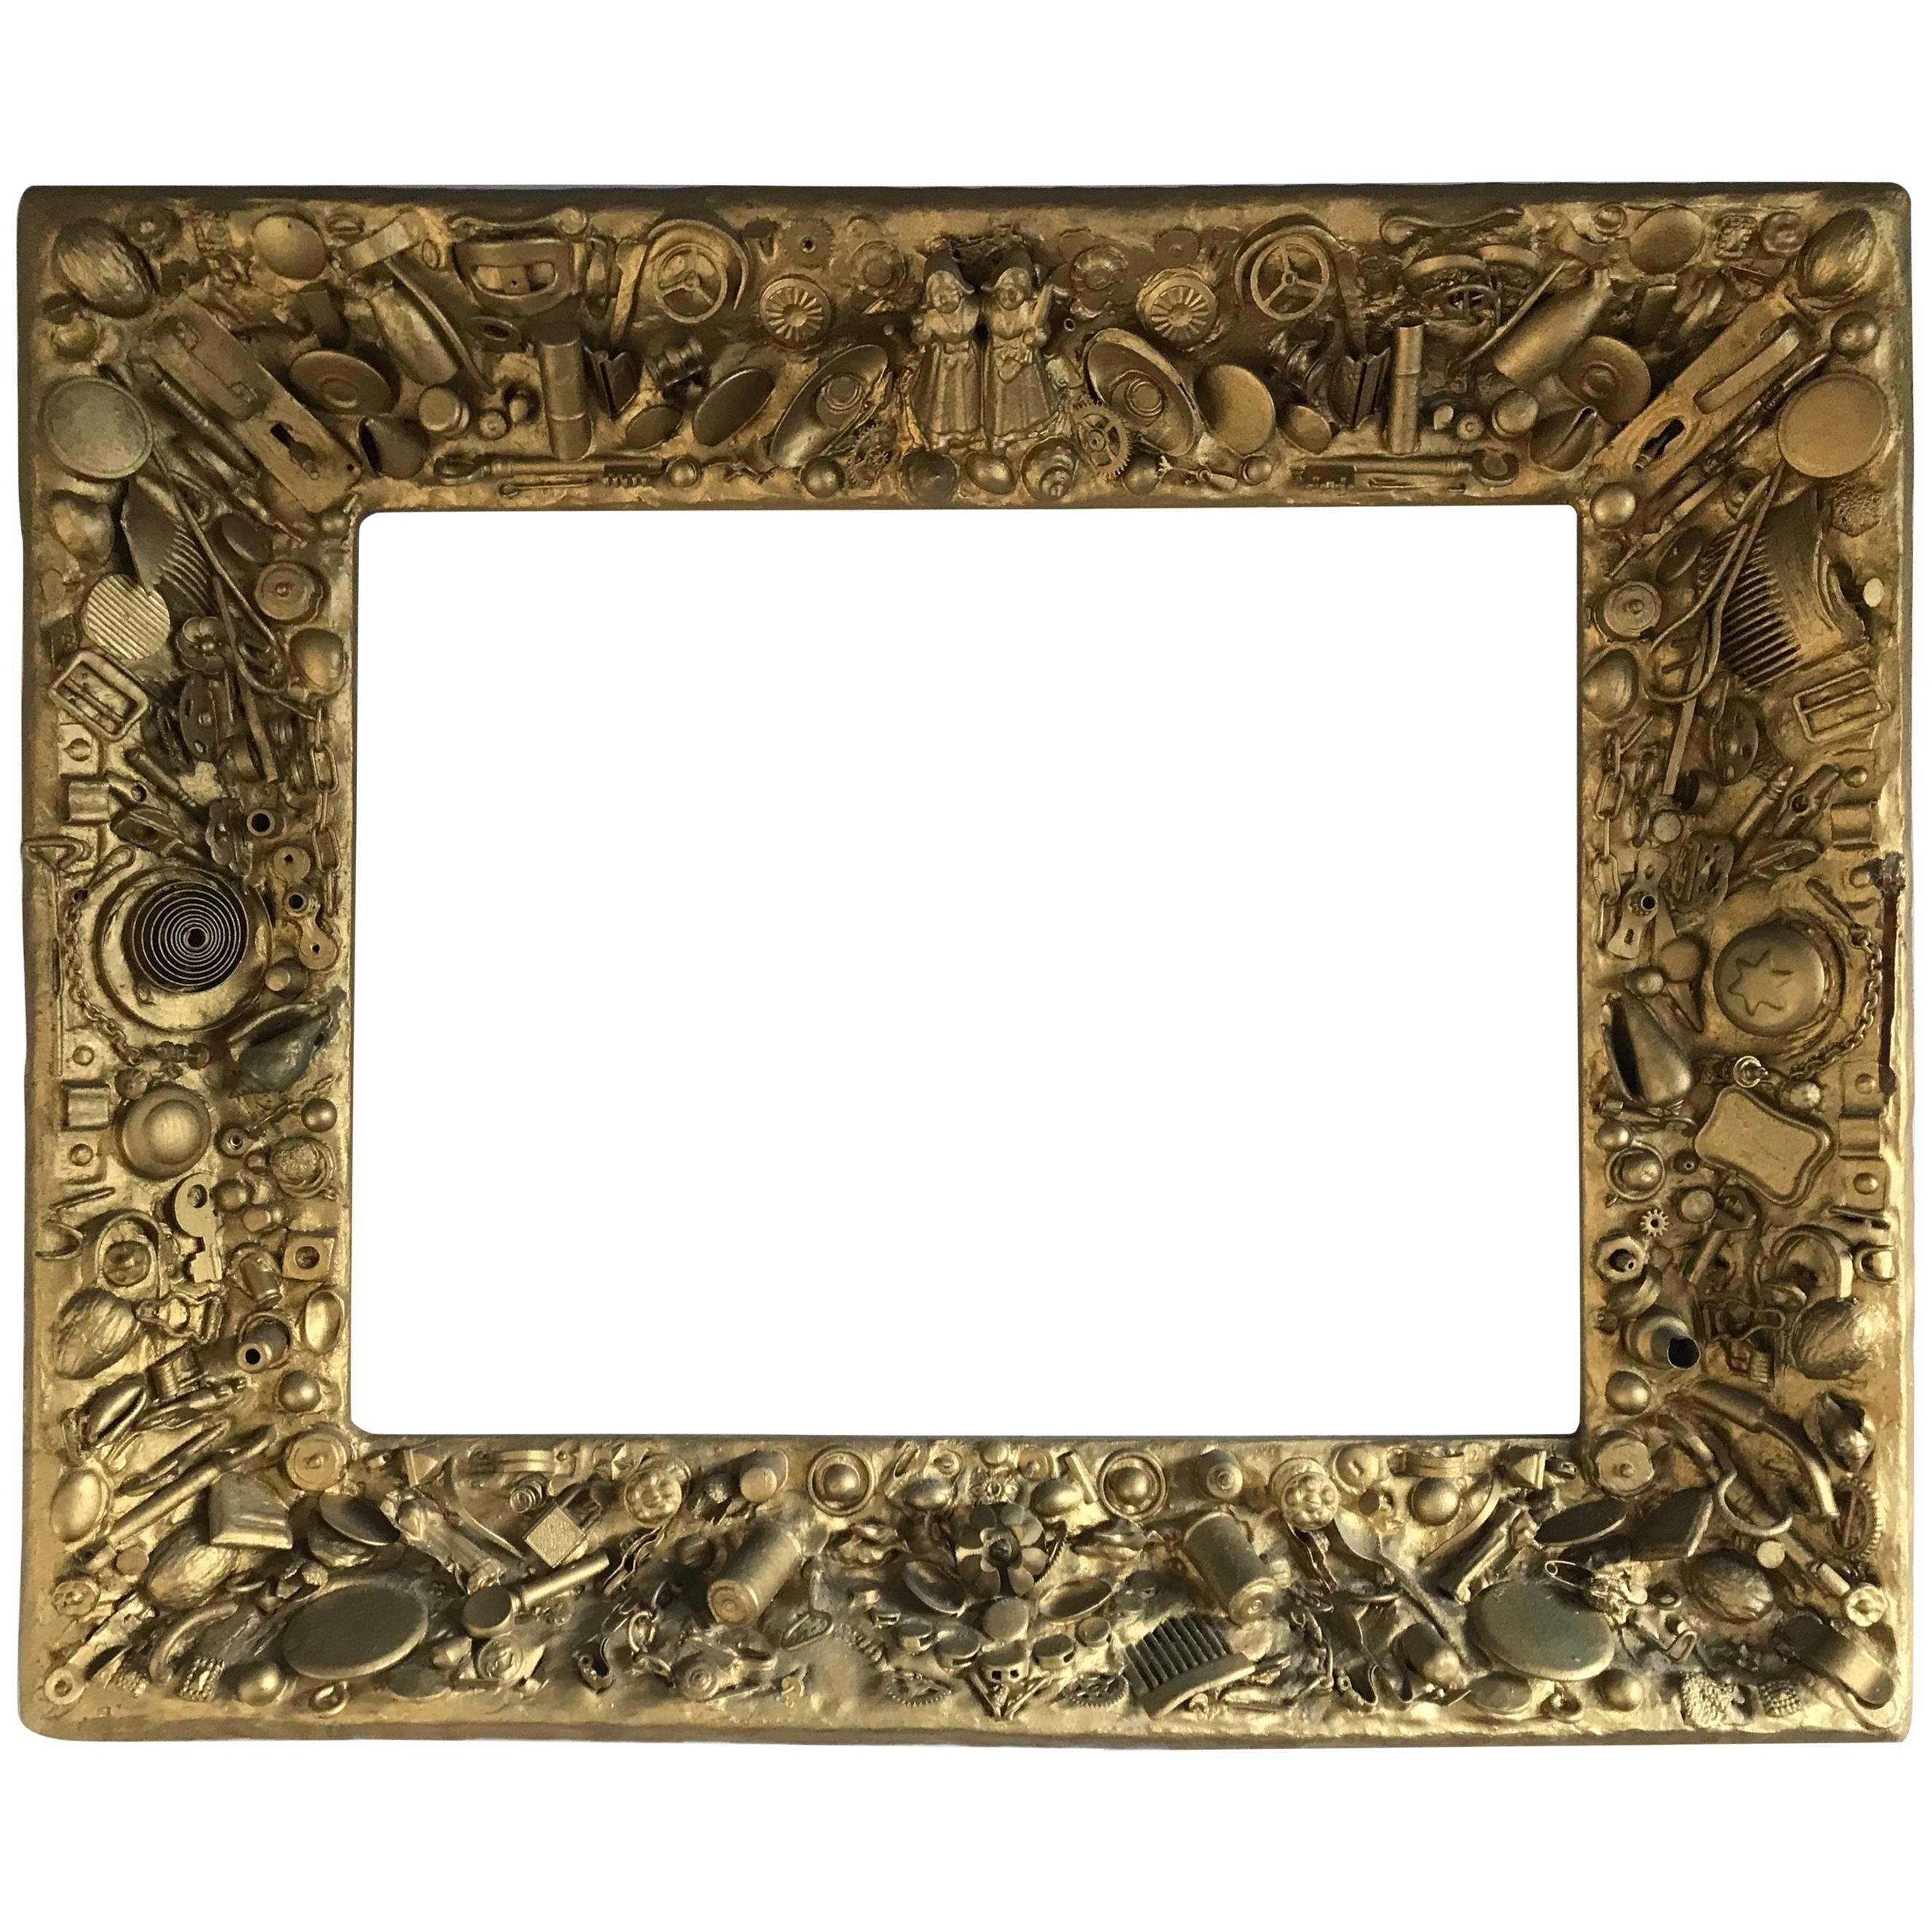 Rare Vintage Gold Colored Collecting Fine Art Mirror or Picture Frame